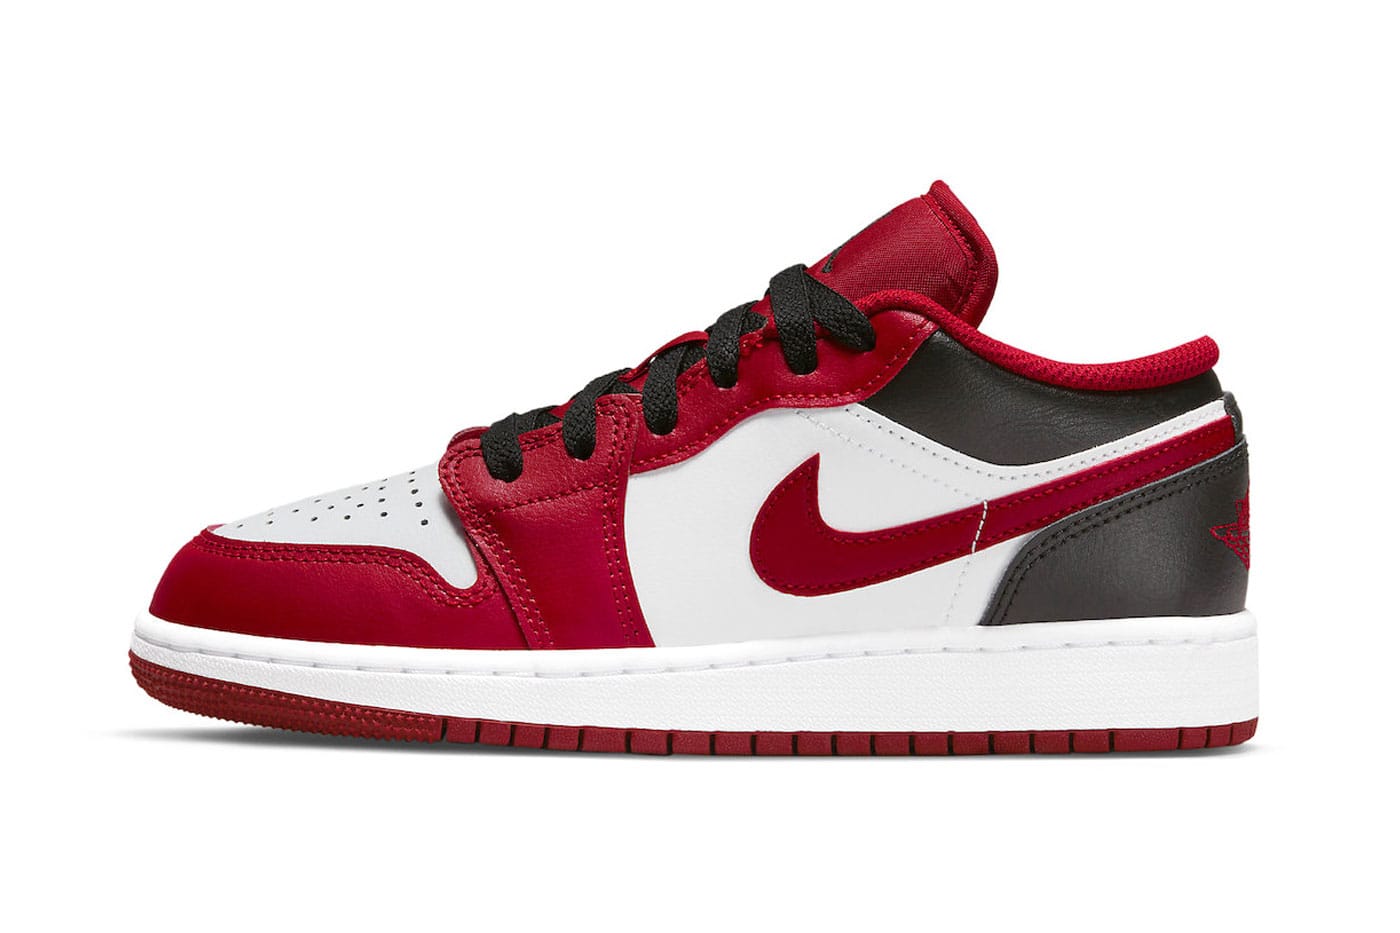 The Air Jordan 1 Low Is Dropping in Another Iteration of the 